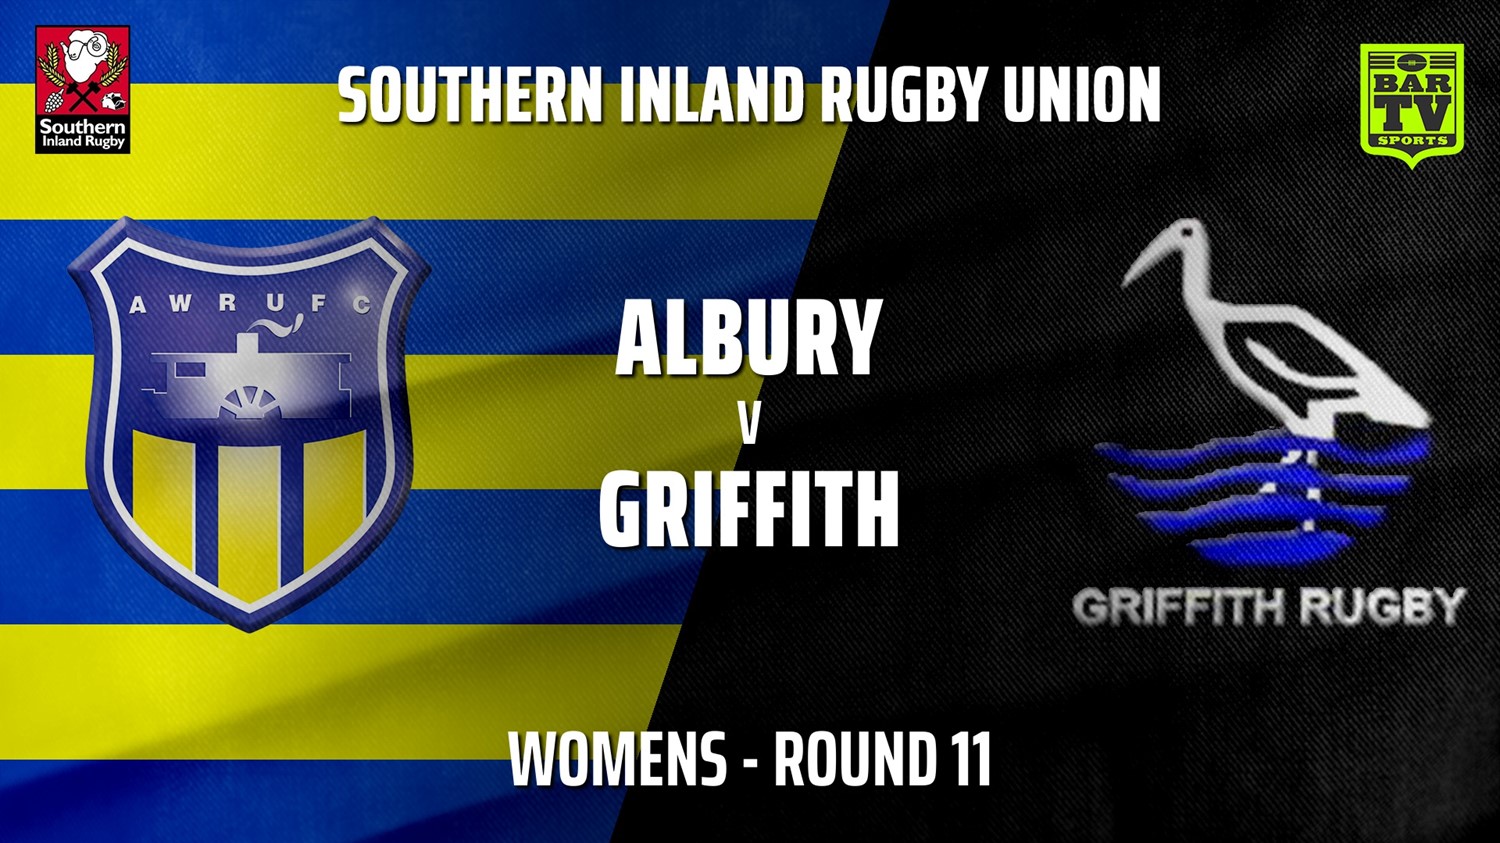 210710-Southern Inland Rugby Union Round 11 - Womens - Albury Steamers v Griffith Slate Image